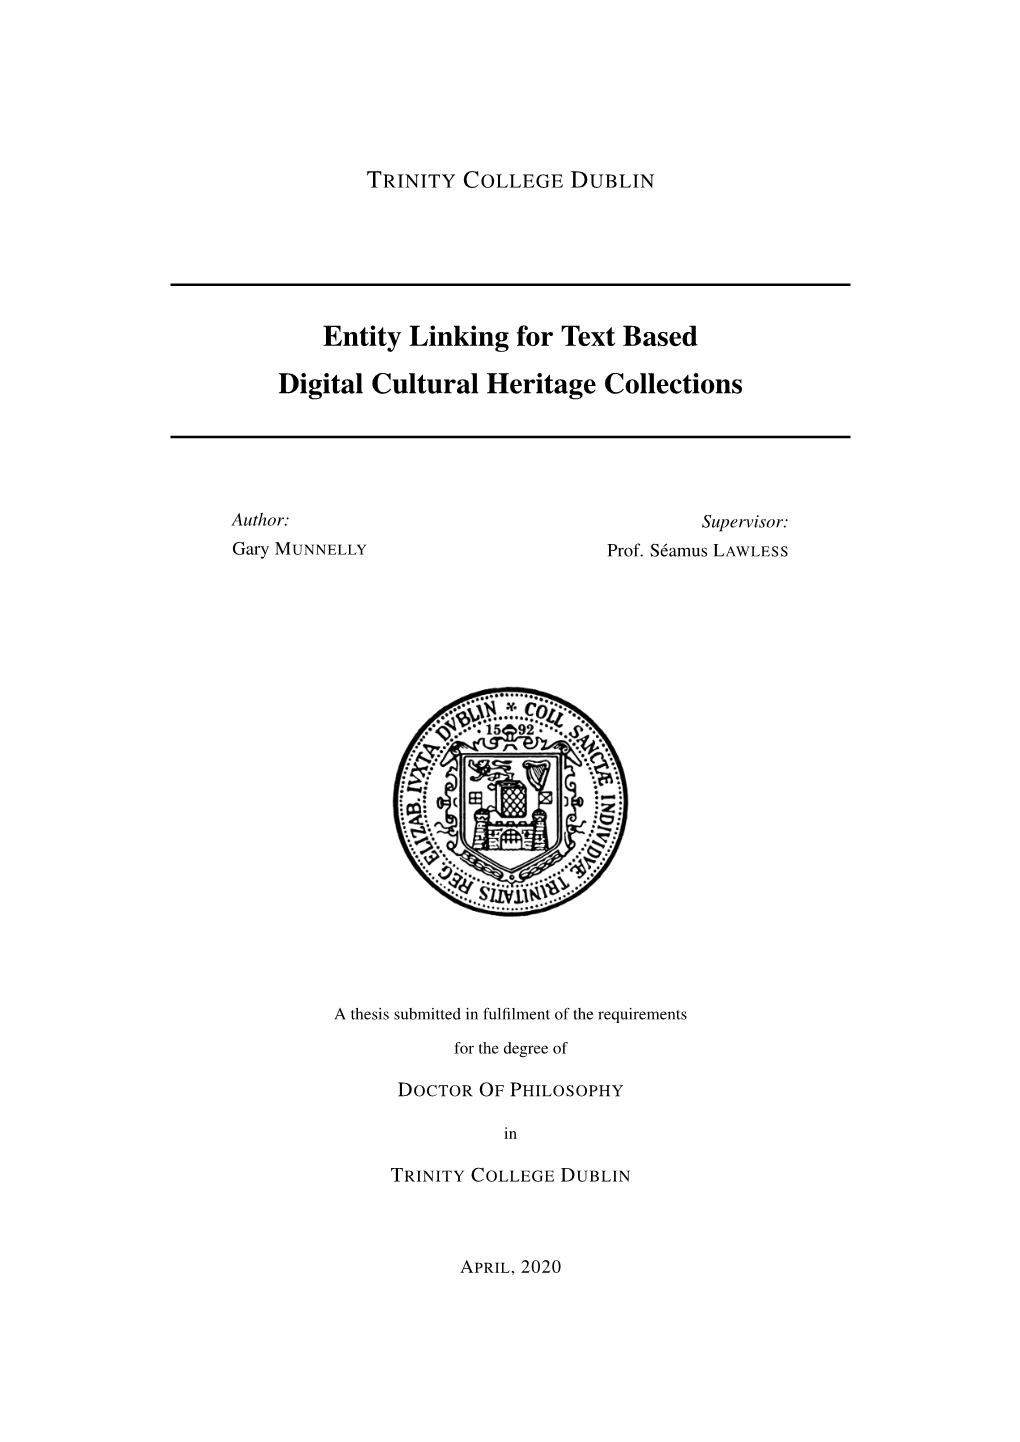 Entity Linking for Text Based Digital Cultural Heritage Collections